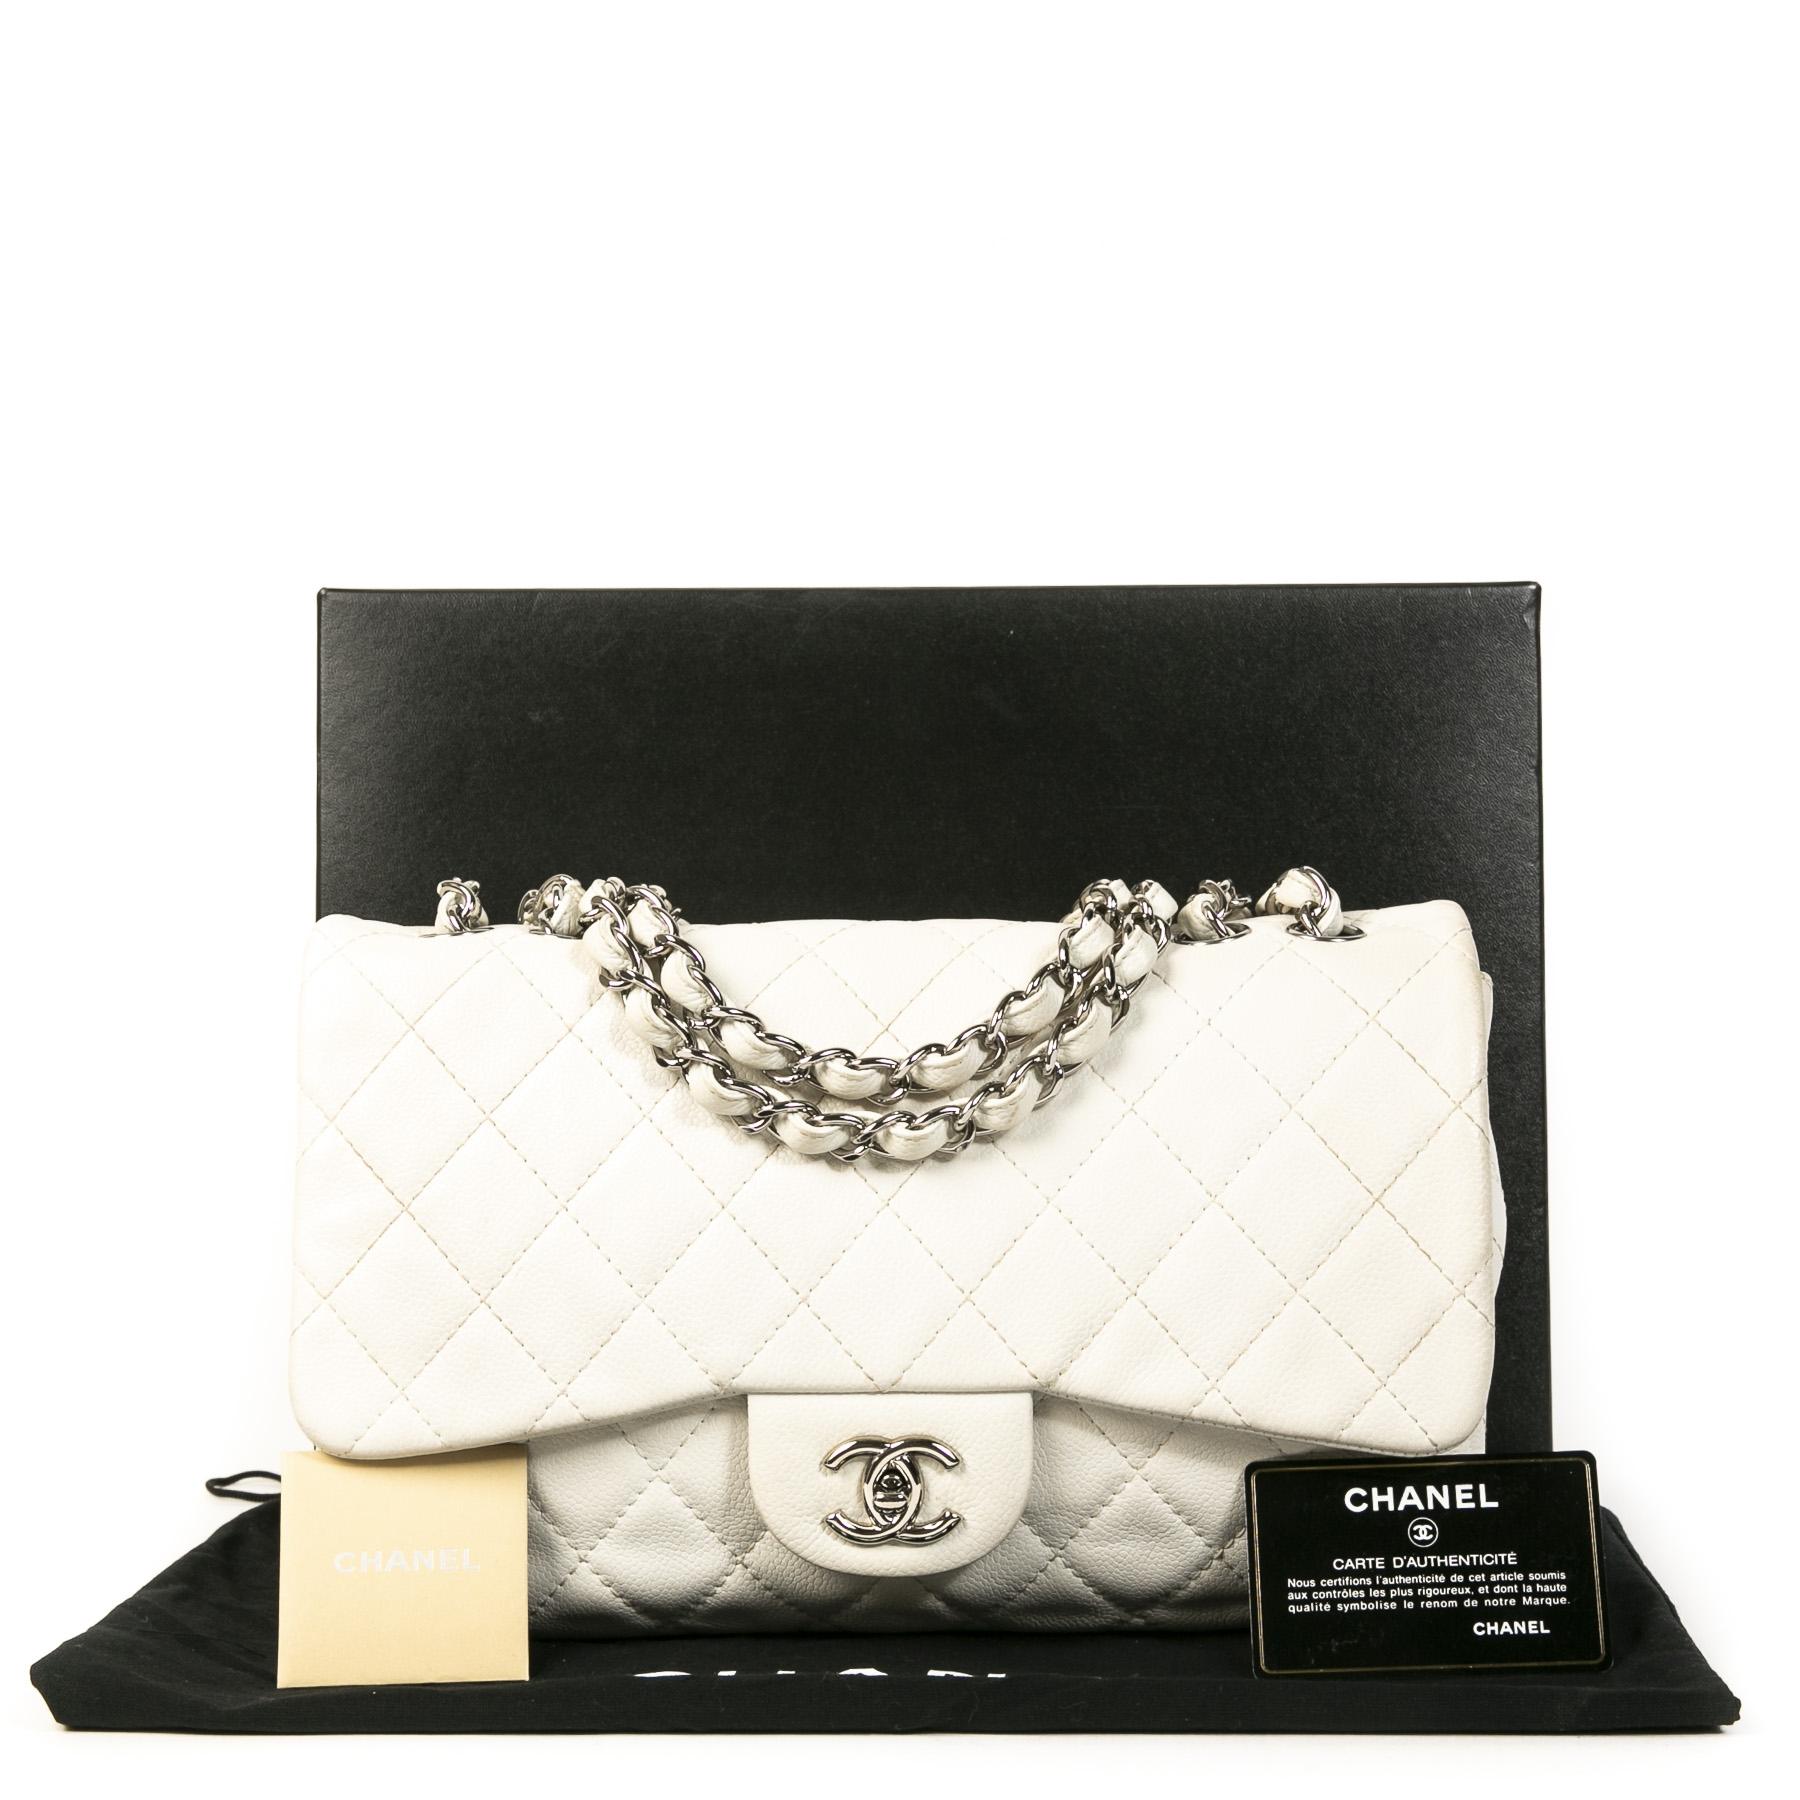 Good preloved condition

Chanel White Leather Jumbo Classic Flap Bag

The most wanted and iconic bag in the word, the classic Chanel Classic Flap Bag. This jumbo sized Flap Bag is beautifully crafted in white caviar leather and features classy